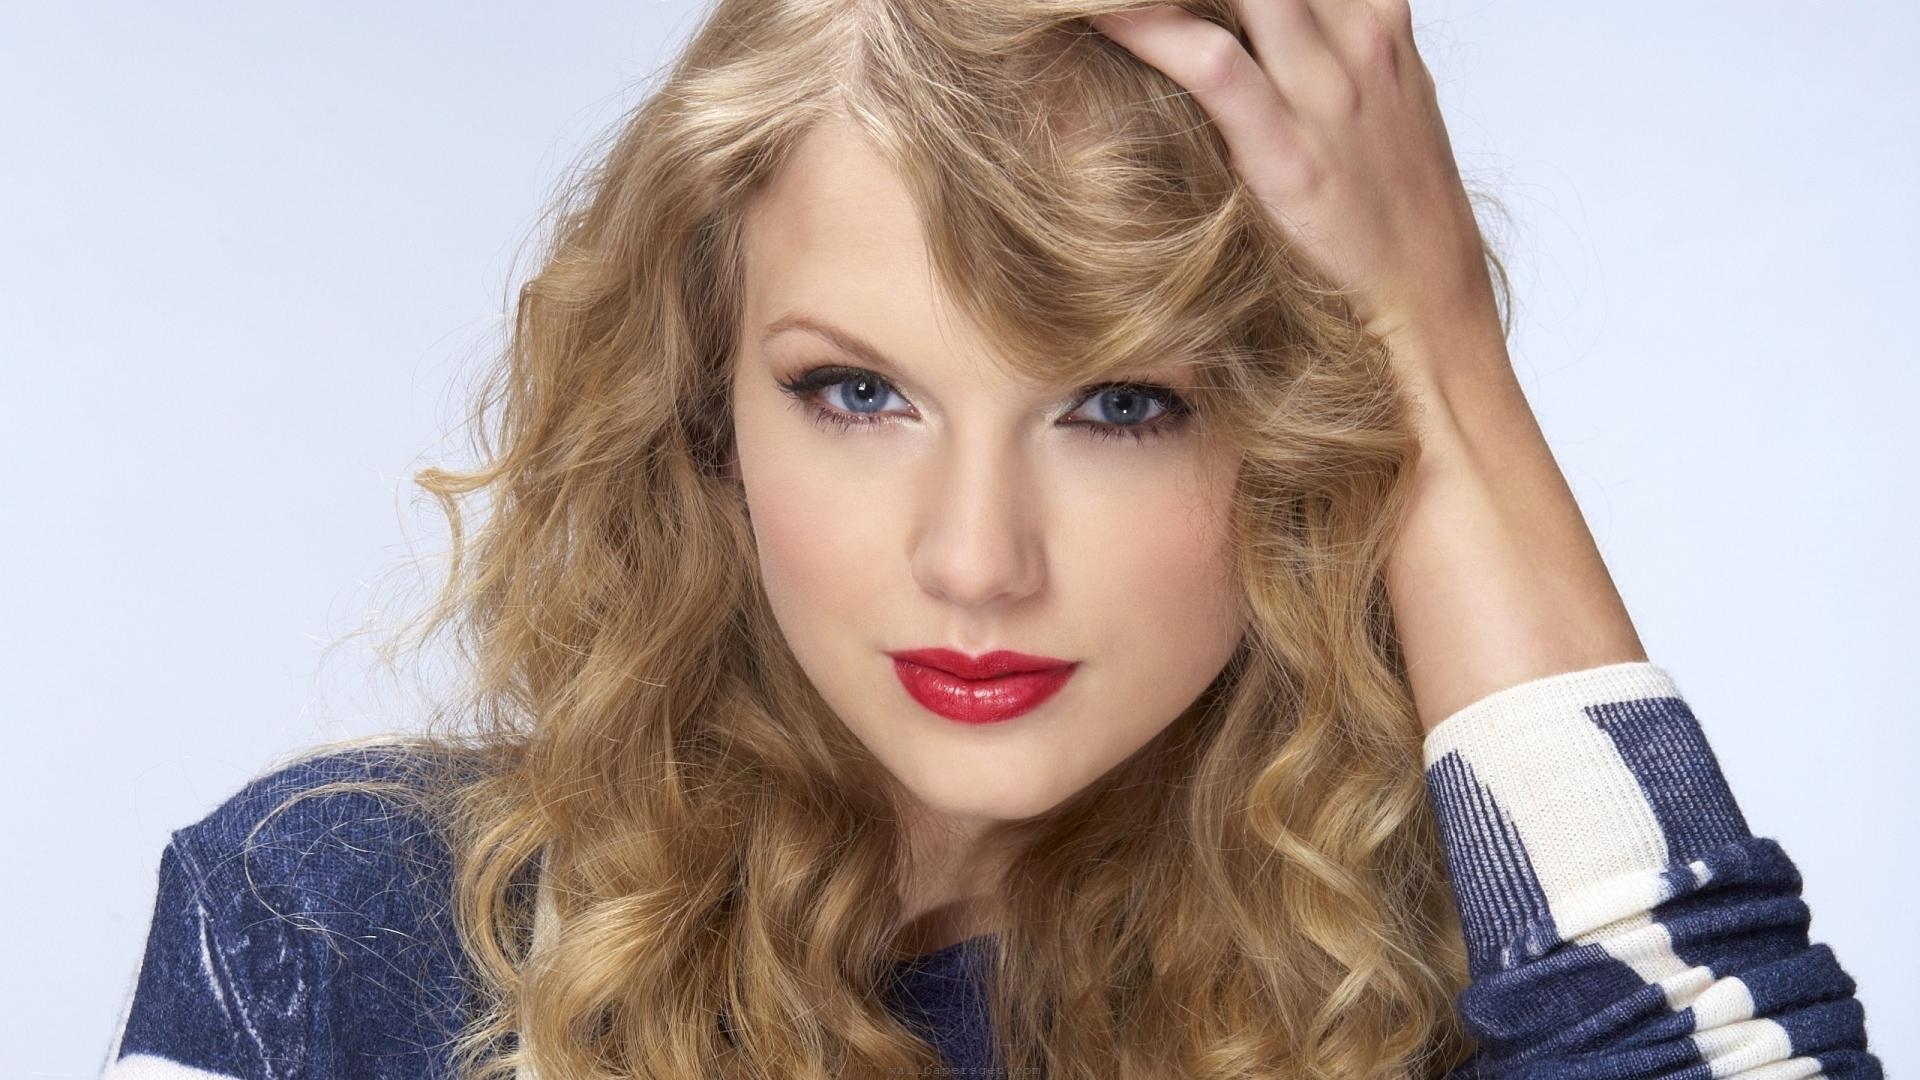 Taylor Swift Windows 8 Themes and Background 2013 HD Background